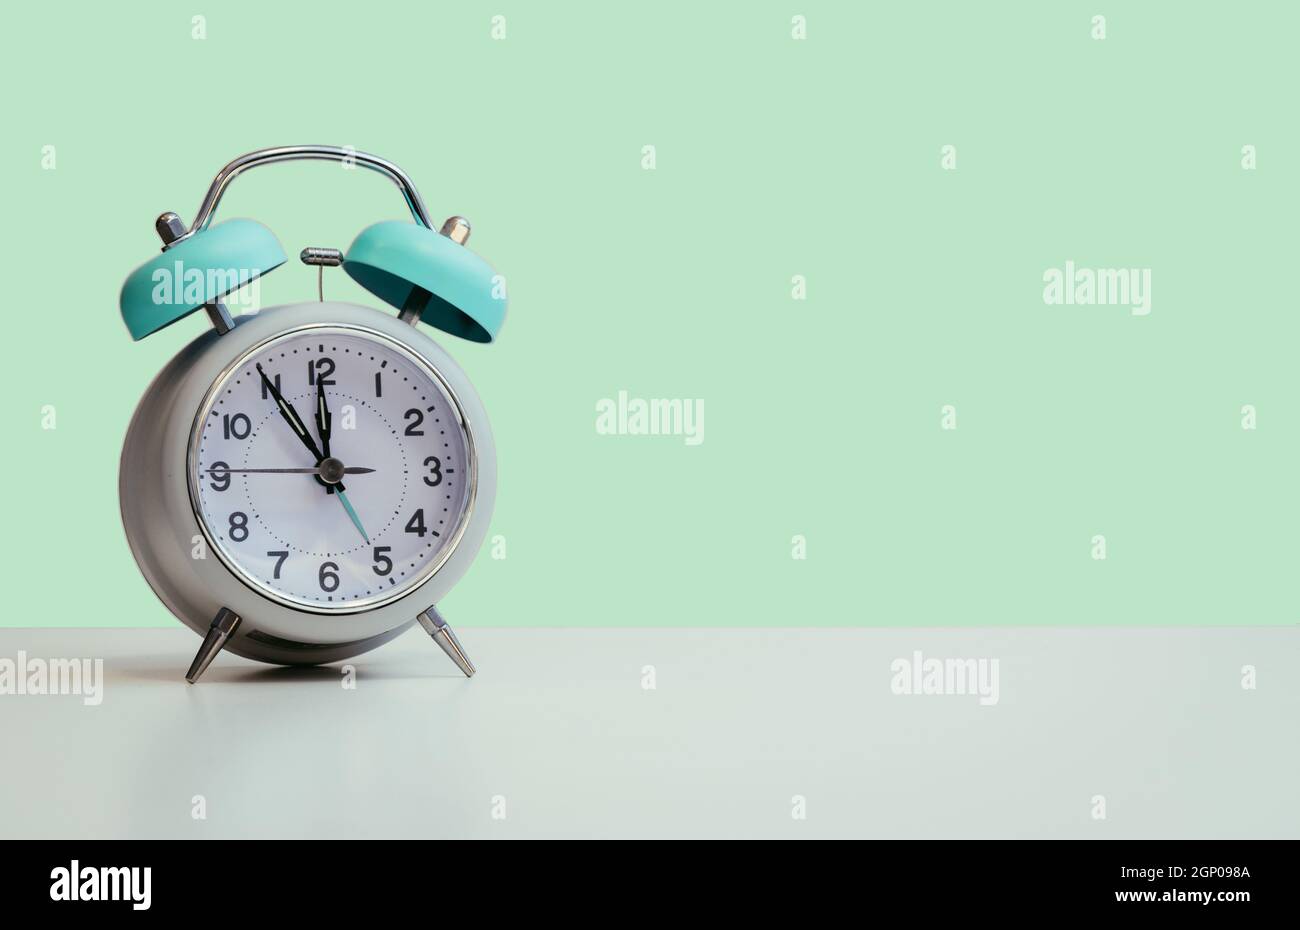 Retro styled white alarm clock, isolated and copy space, green Stock Photo